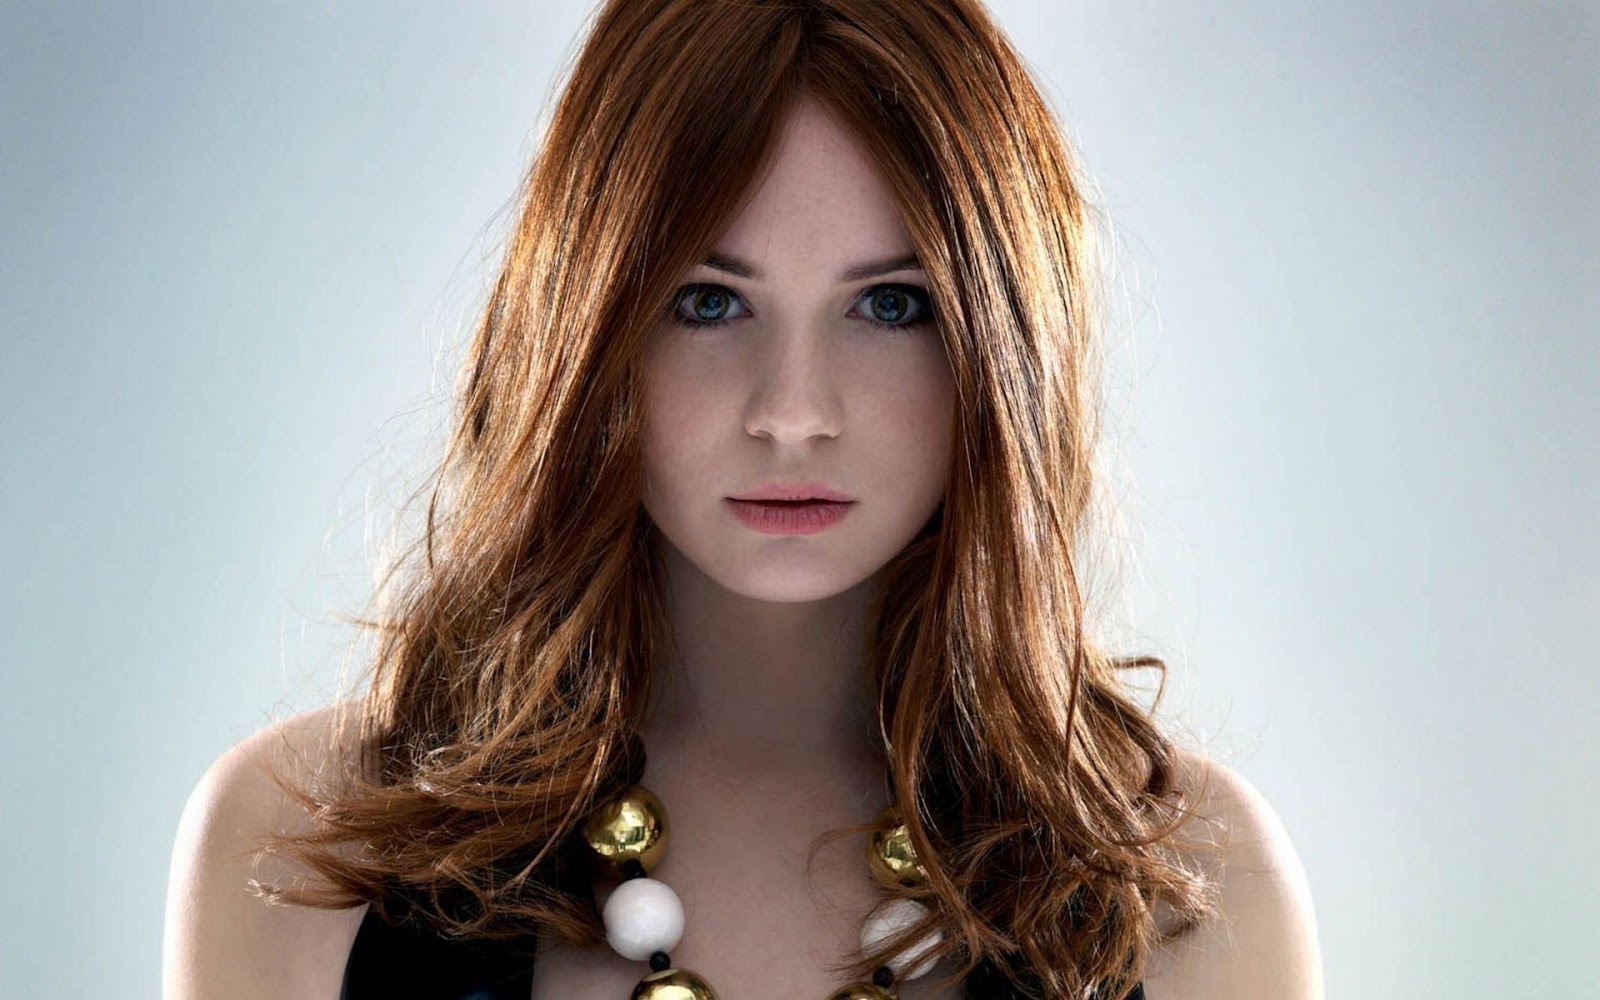 List of Actress Karen Gillan new upcoming Hollywood movies in 2016, 2017 Calendar on Upcoming Wiki. Updated list of movies 2016-2017. Info about films released in wiki, imdb, wikipedia.